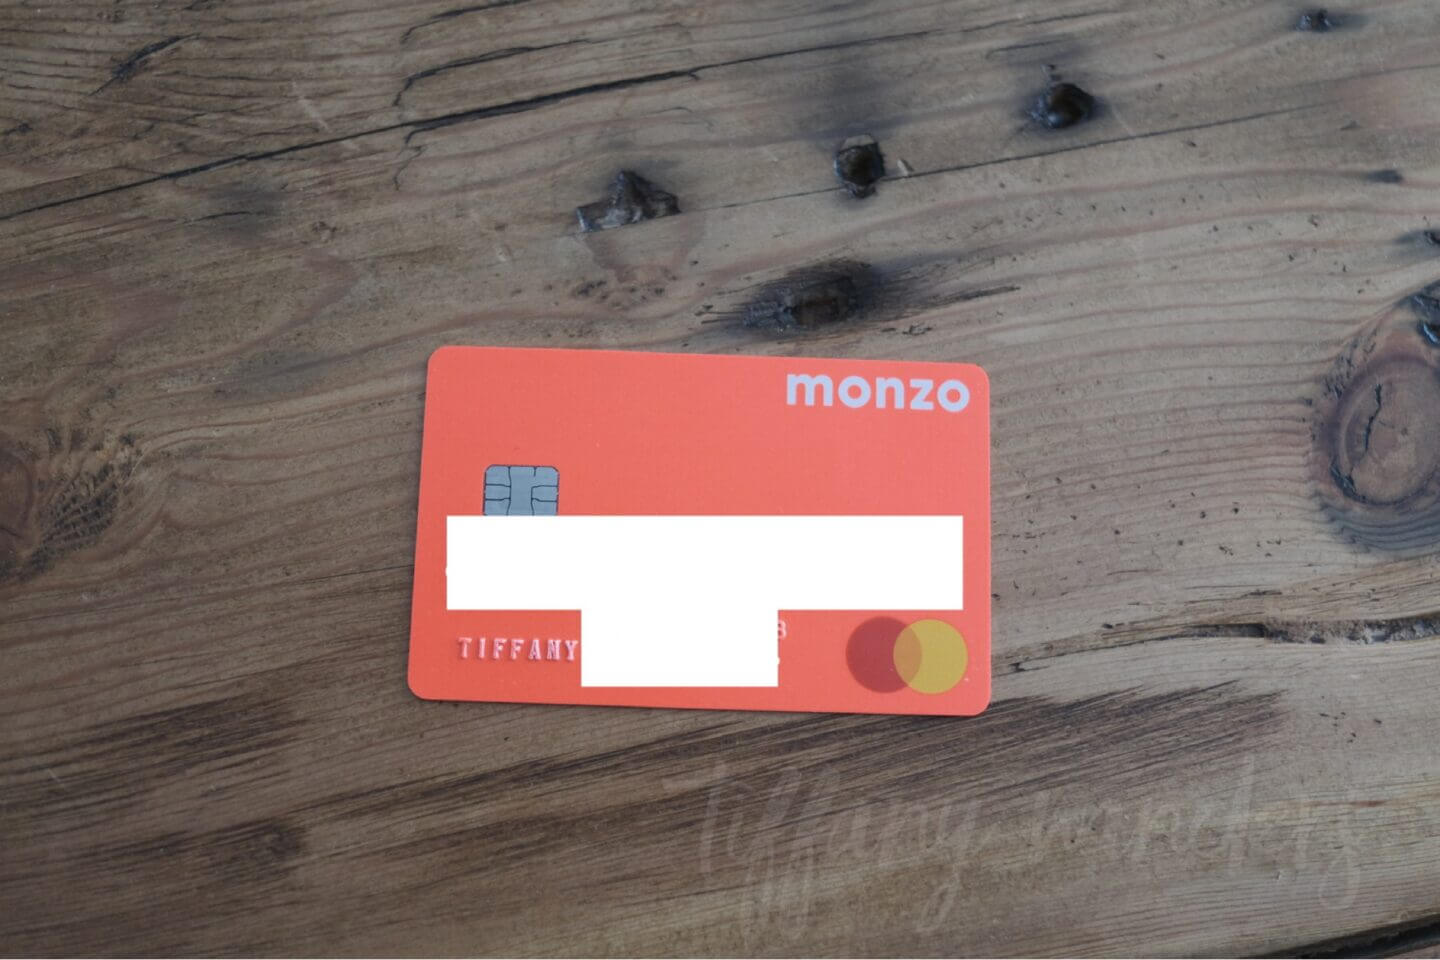 Traveling Abroad: My Monzo Card Experience